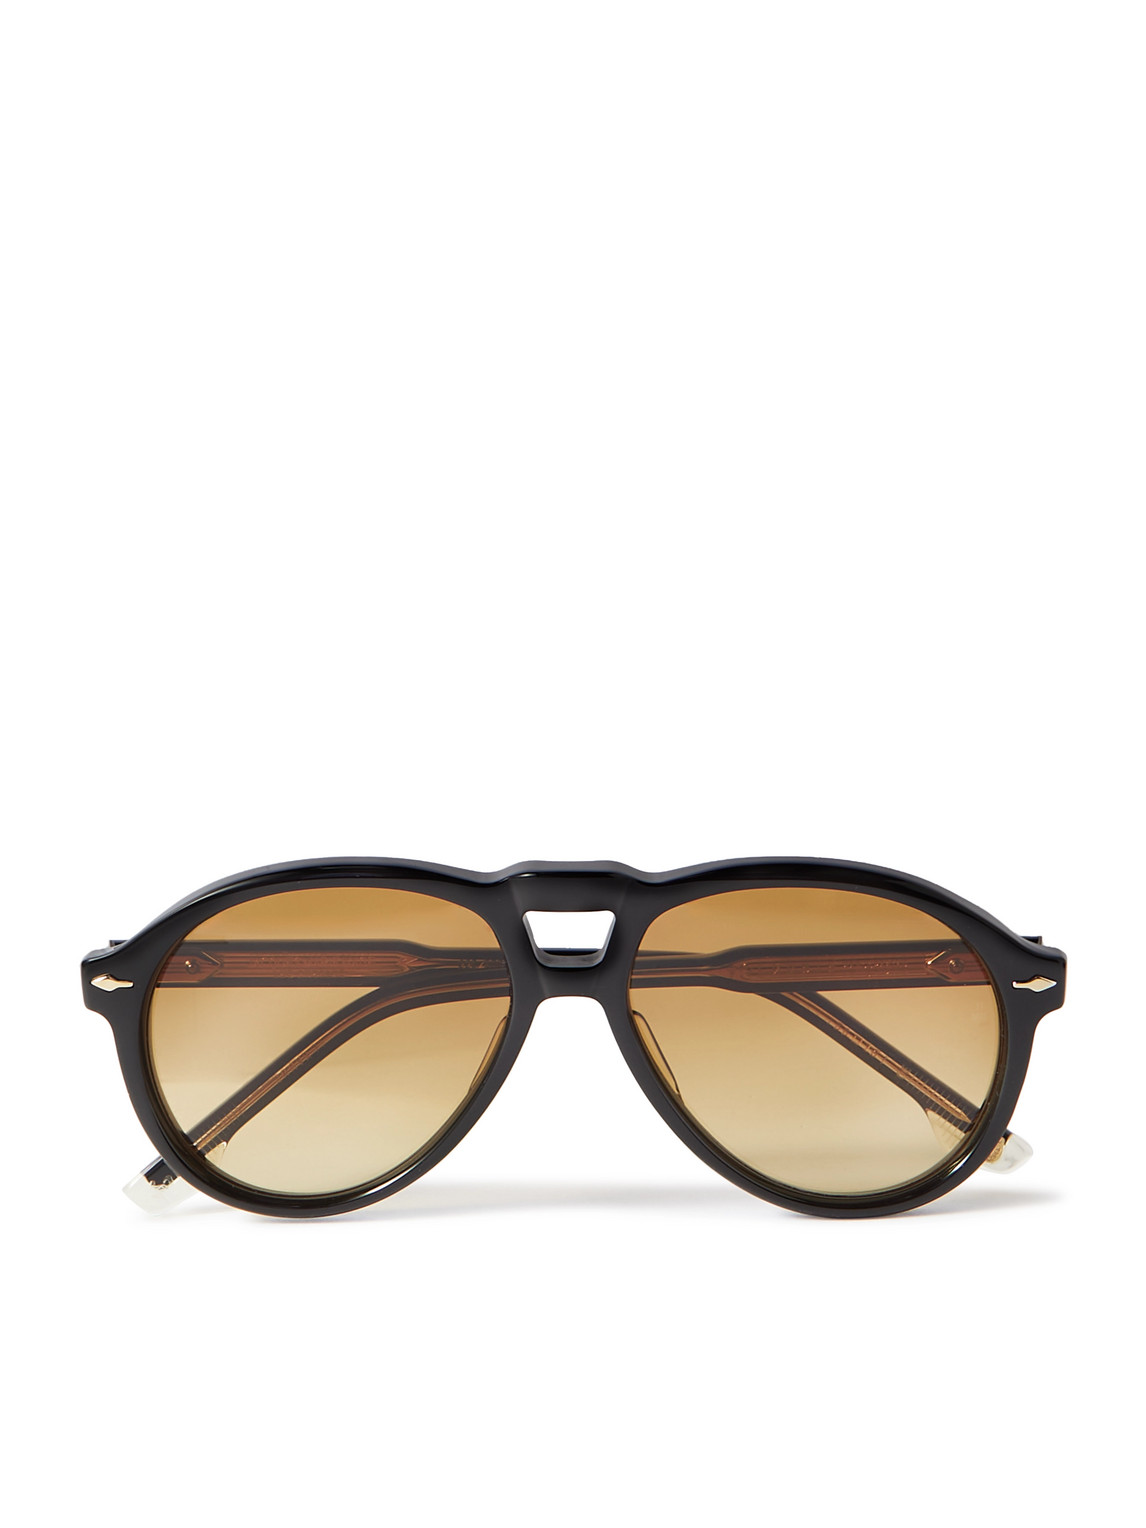 Jacques Marie Mage Valkyrie Aviator-style Acetate Sunglasses In Black